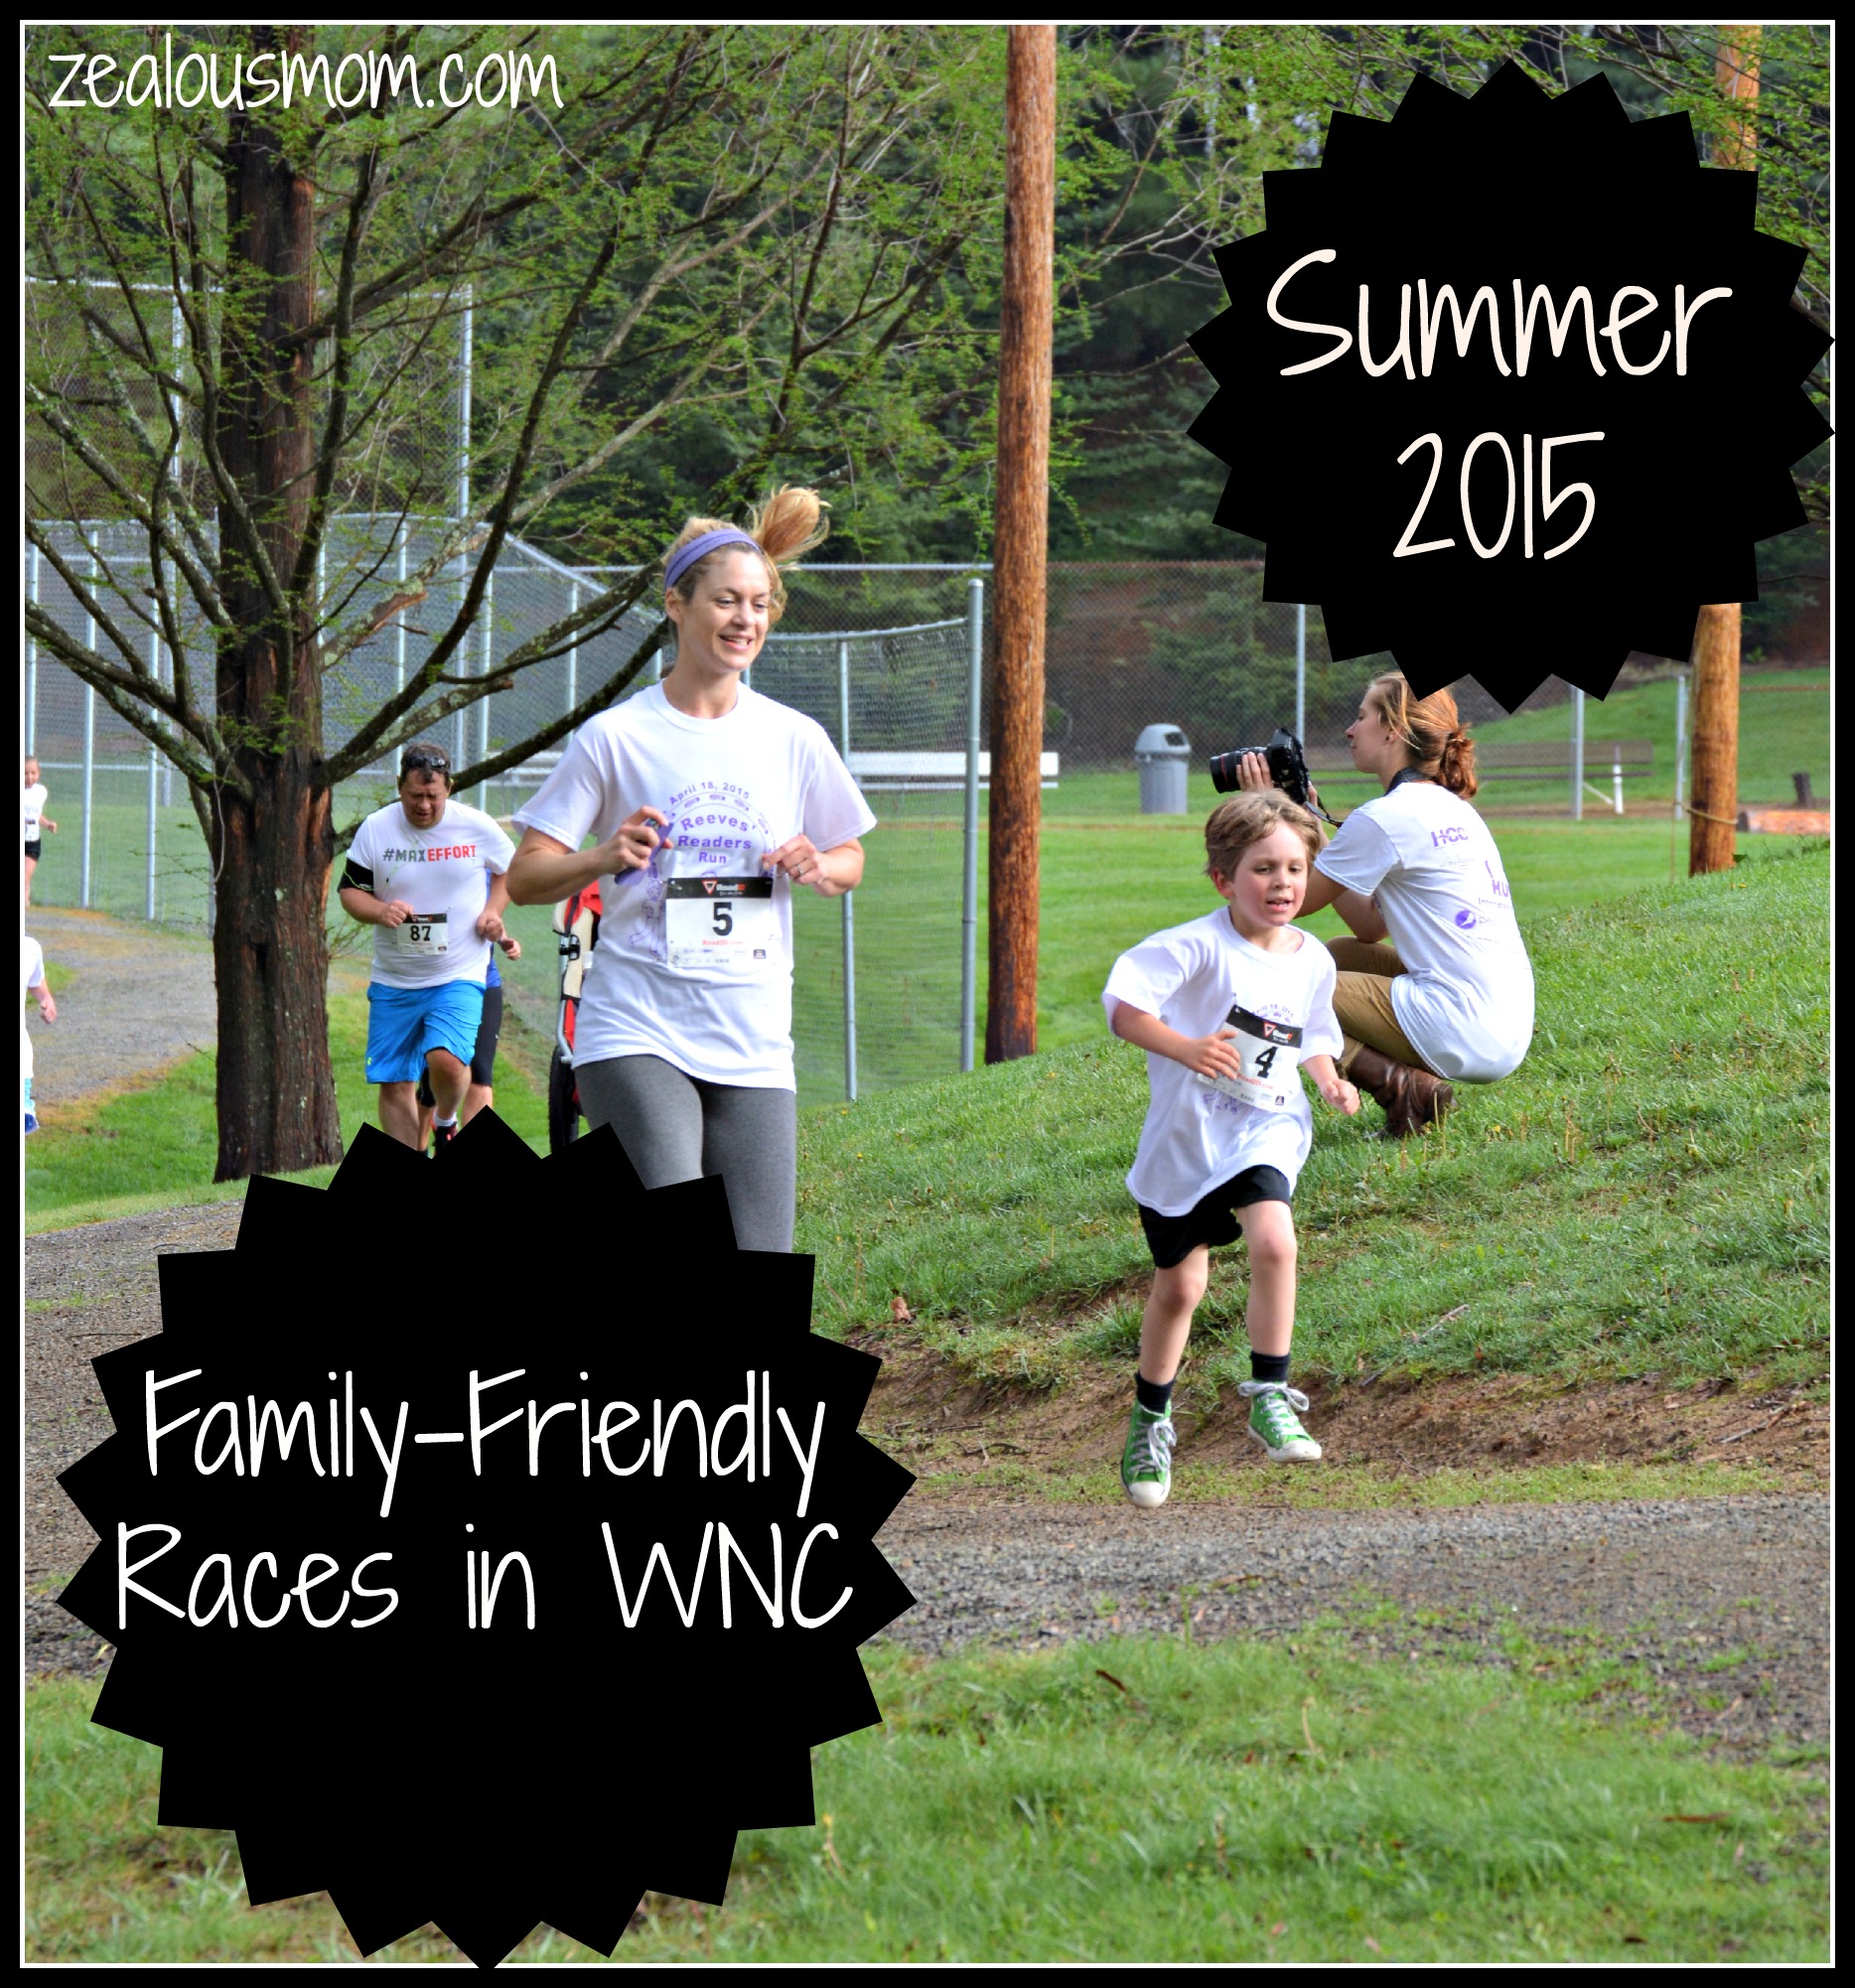 Family-Friendly Races in WNC: Summer 2015